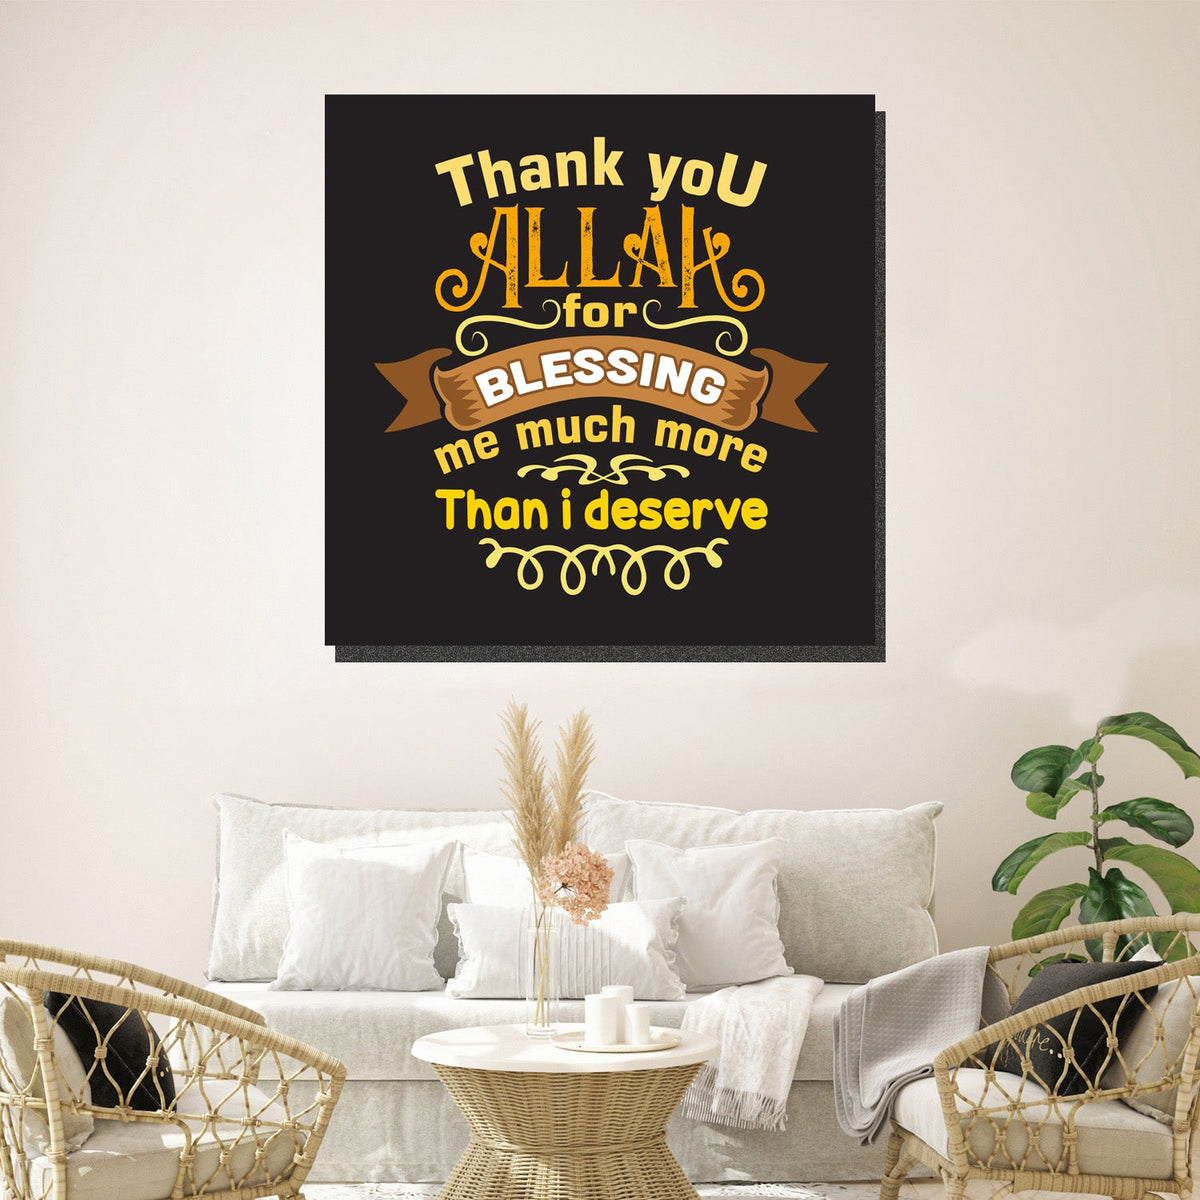 https://cdn.shopify.com/s/files/1/0387/9986/8044/products/ThankYouAllahCanvasArtprintStretched-2.jpg